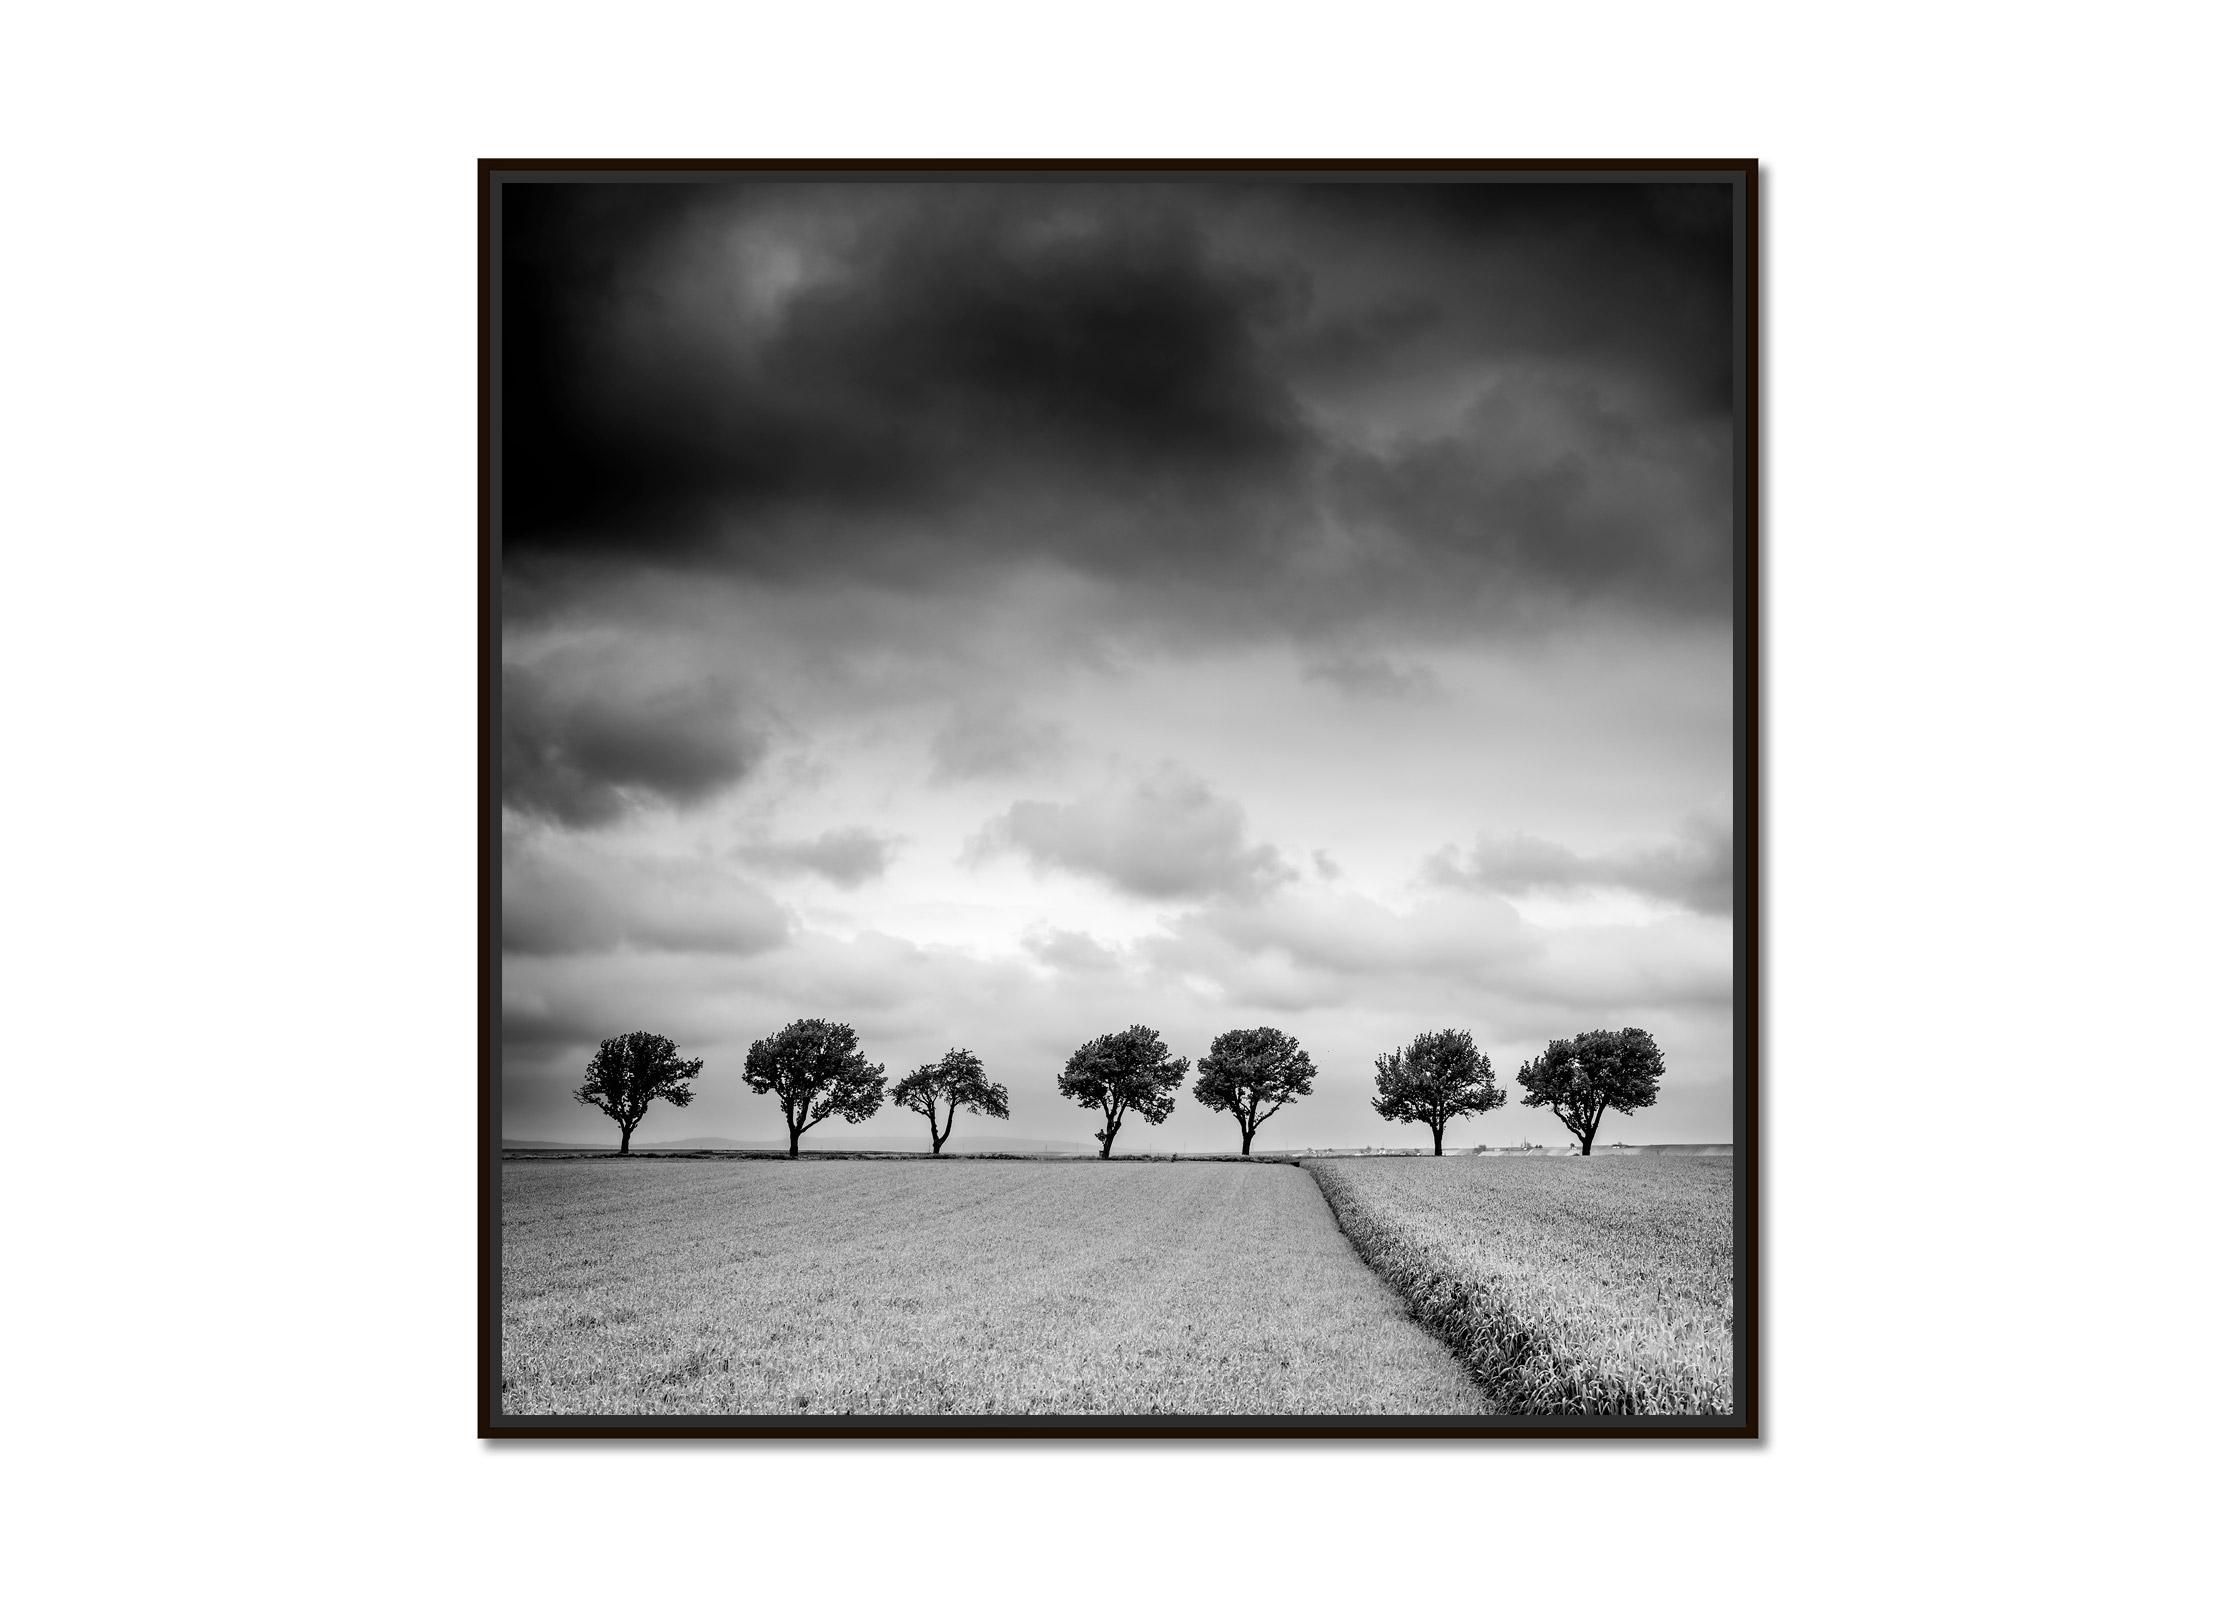 The Trees on the edge of Field, cloudy, storm, black white art landscape photography - Print de Gerald Berghammer